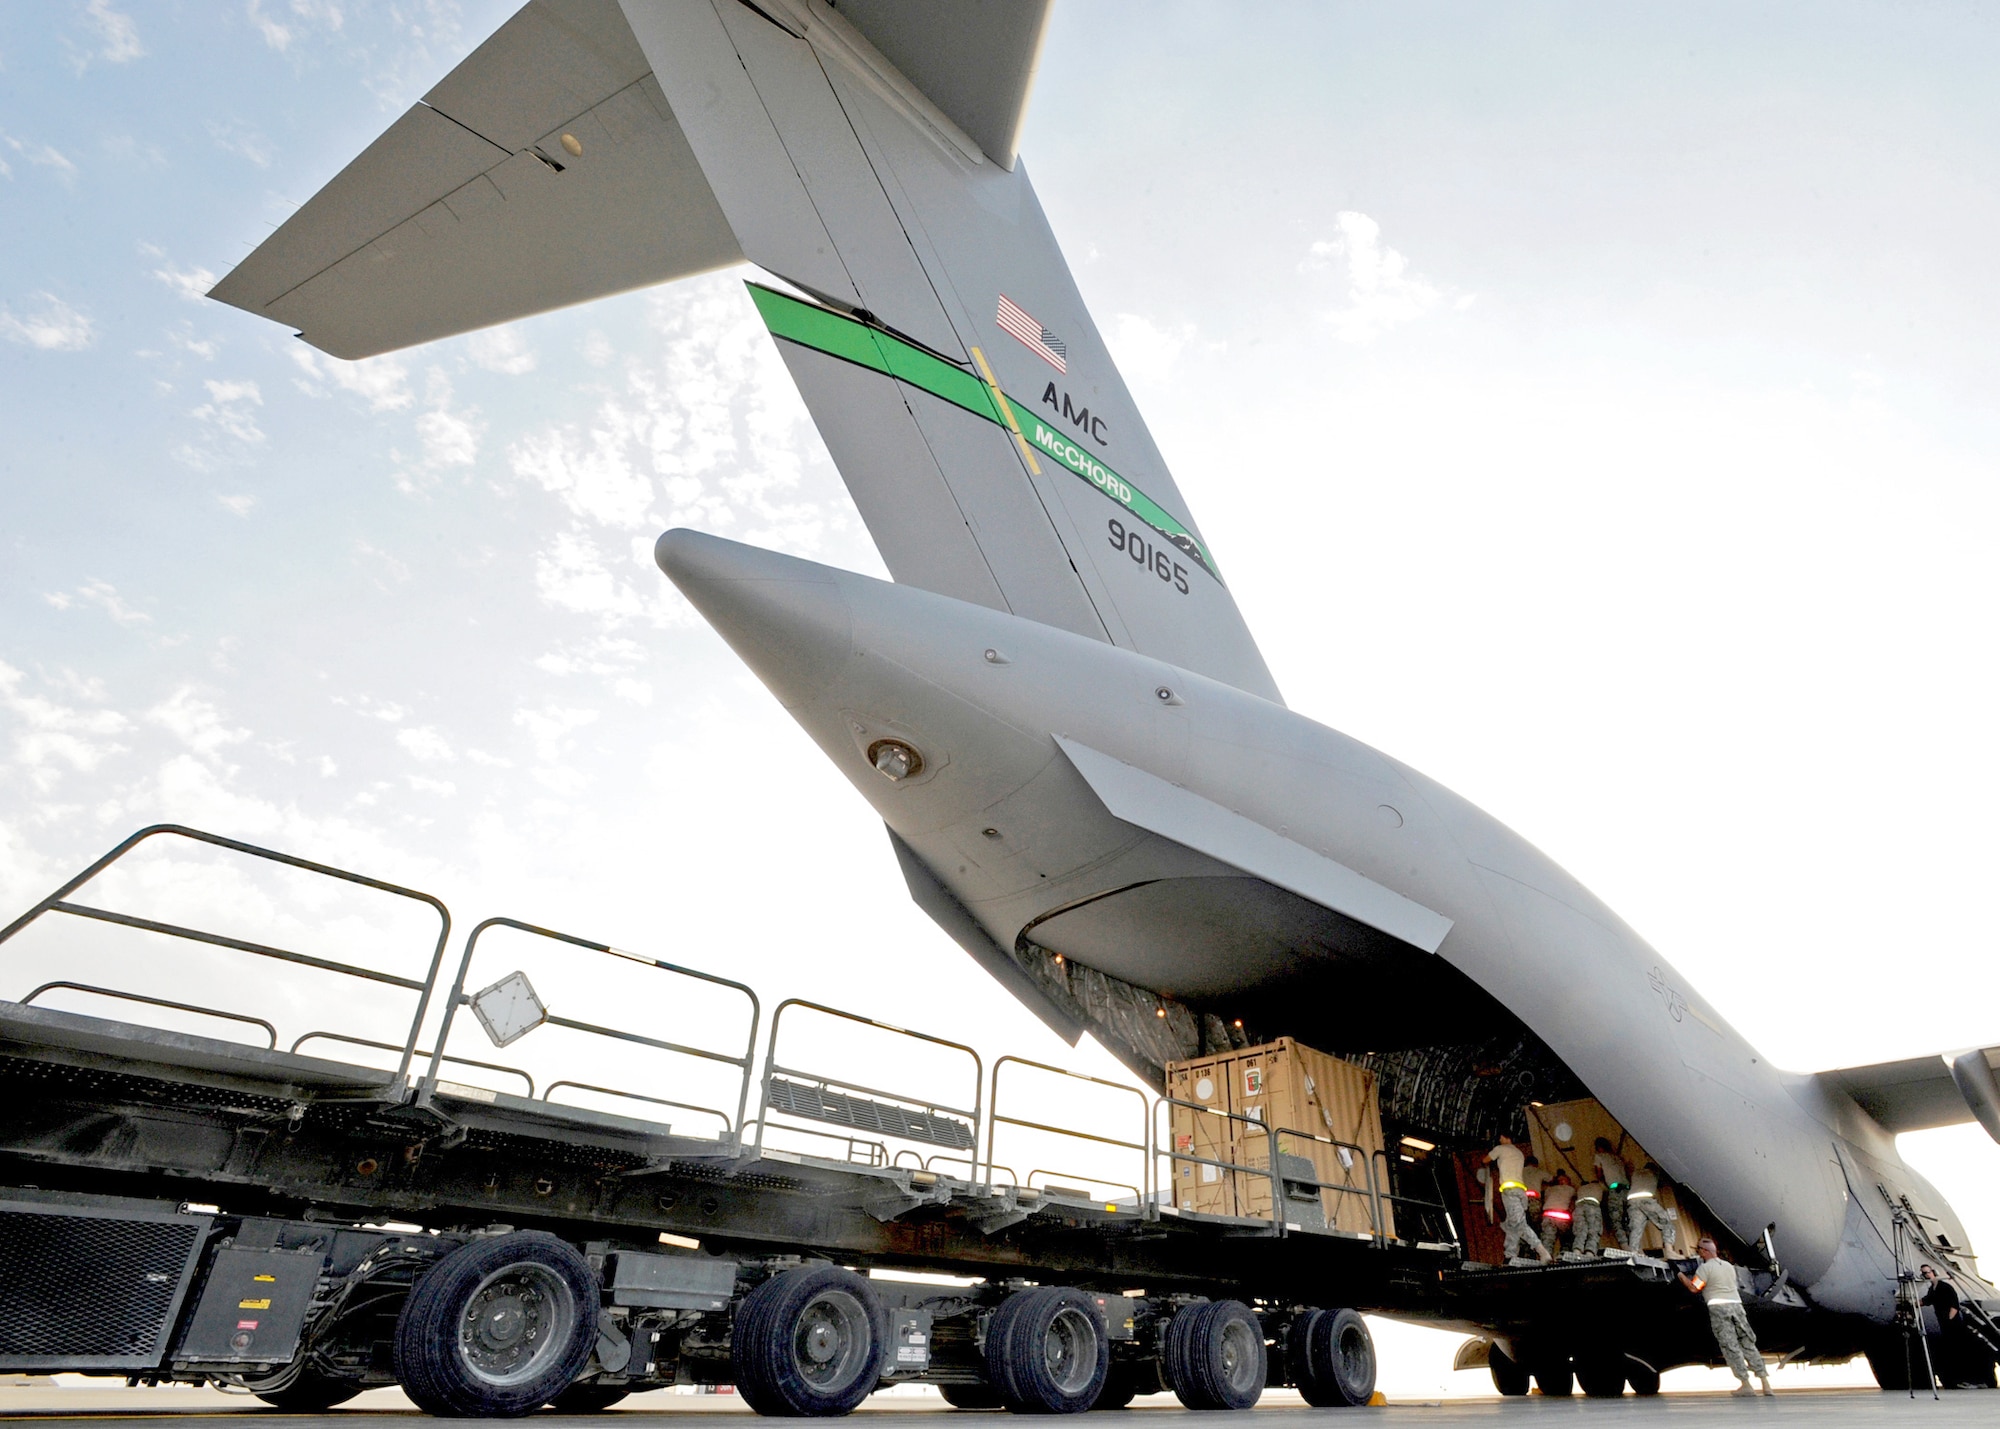 Aerial port Airmen from the 386th Expeditionary Logistics Readiness Squadron use a K-loader to move pallets of cargo onto a C-17 Globemaster III Nov. 3, 2010, at an air base in Southwest Asia.  A K-loader is a specialized flat-bed truck designed to carry pallets of cargo from a marshalling yard to waiting aircraft. The K-loader's bed can be raised, lowered or pitched in different directions so that it mates perfectly with the cargo bay of any airlifter. The bed also is fitted with a roller system that allows Airmen to push pallets weighing up to 7,000 pounds off the truck and onto aircraft with ease. (U.S. Air Force photo/Senior Airman Laura Turner)